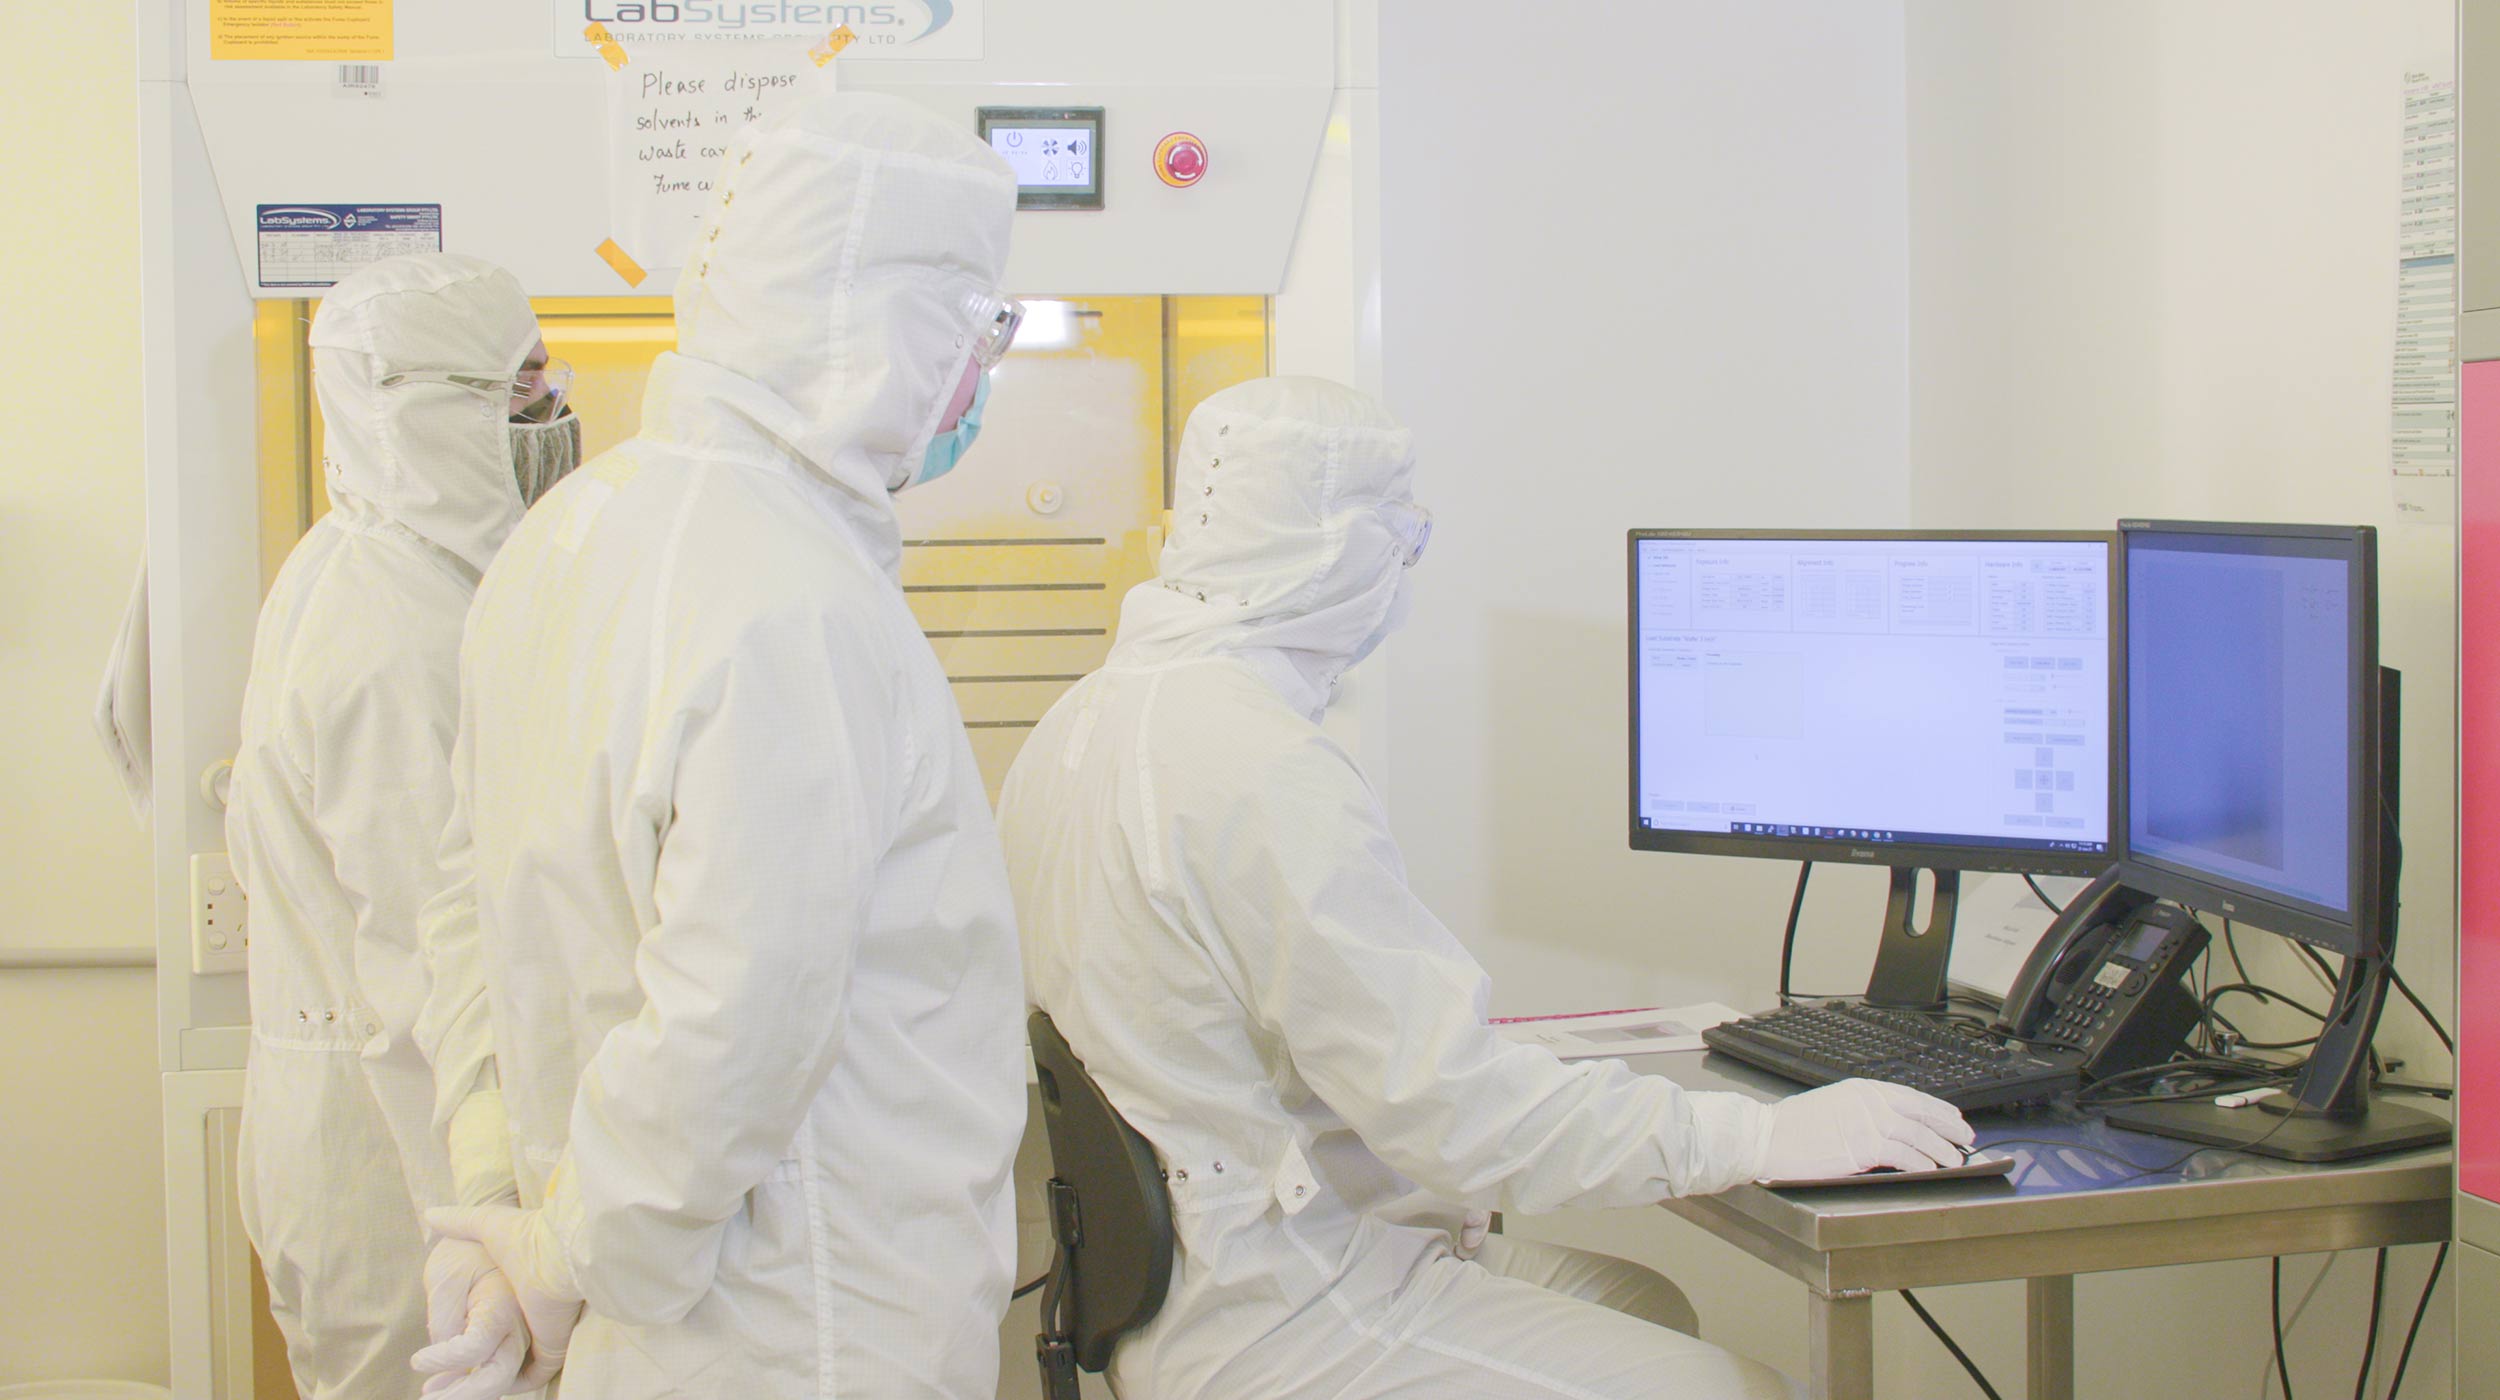 Three people in white protective clothing work on a computer